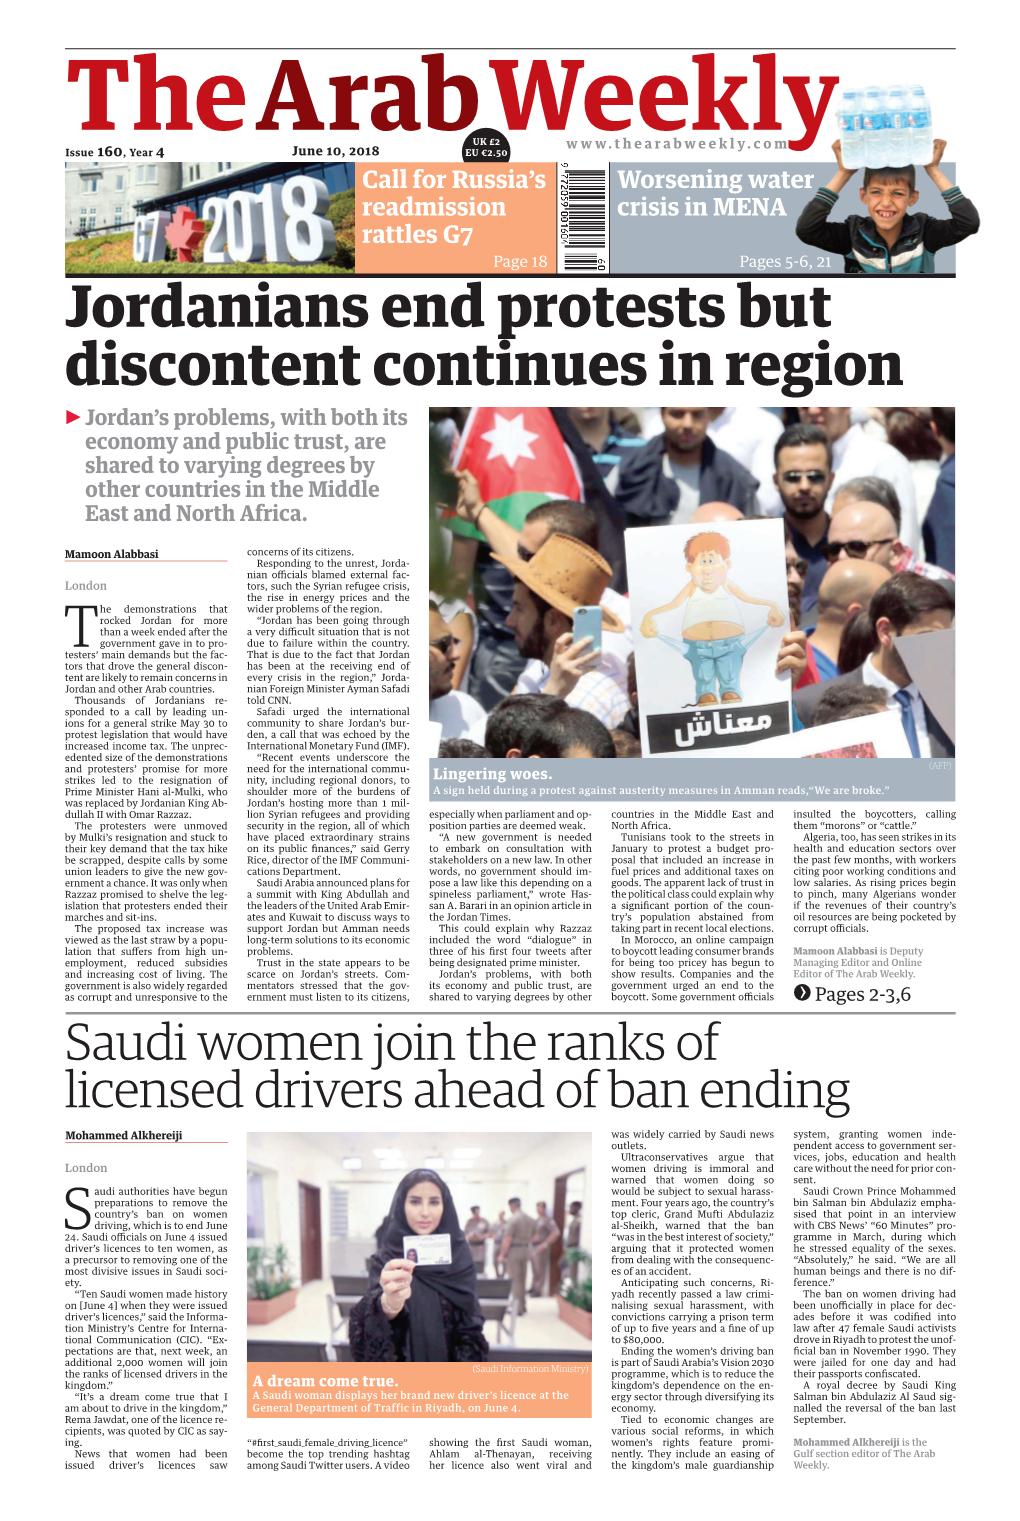 Jordanians End Protests but Discontent Continues in Region